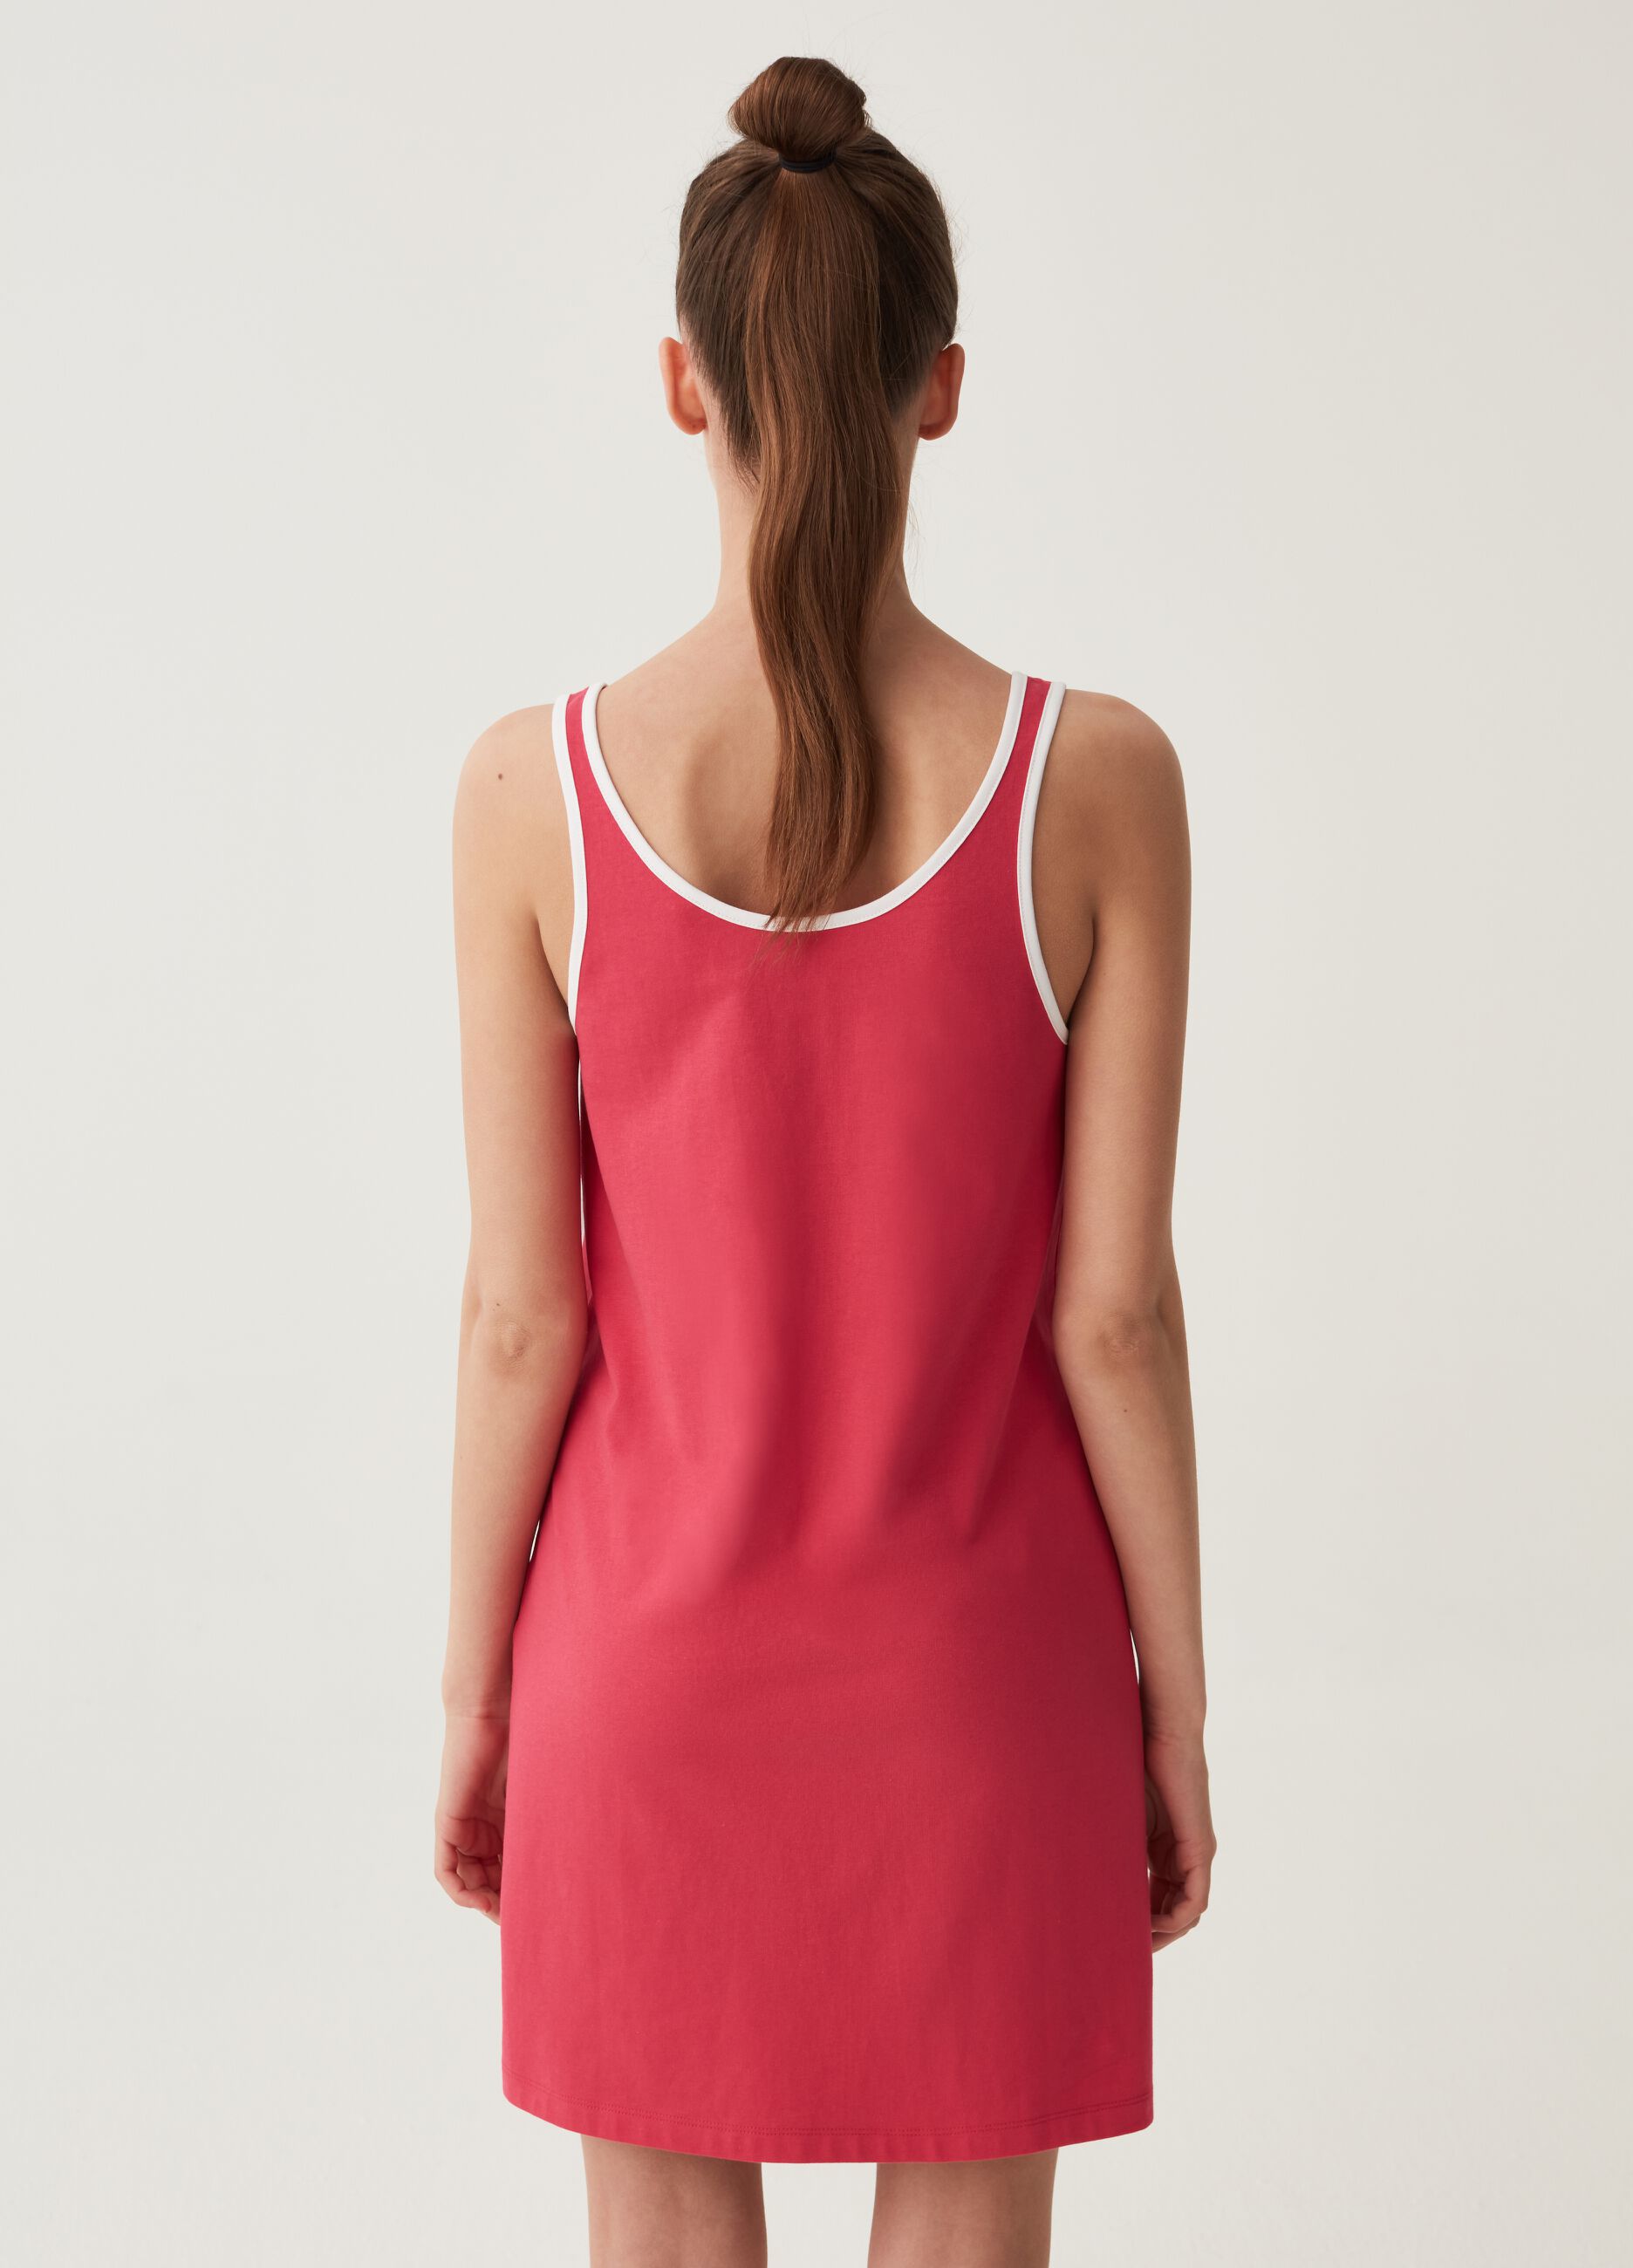 Sleeveless dress with contrasting colour trims